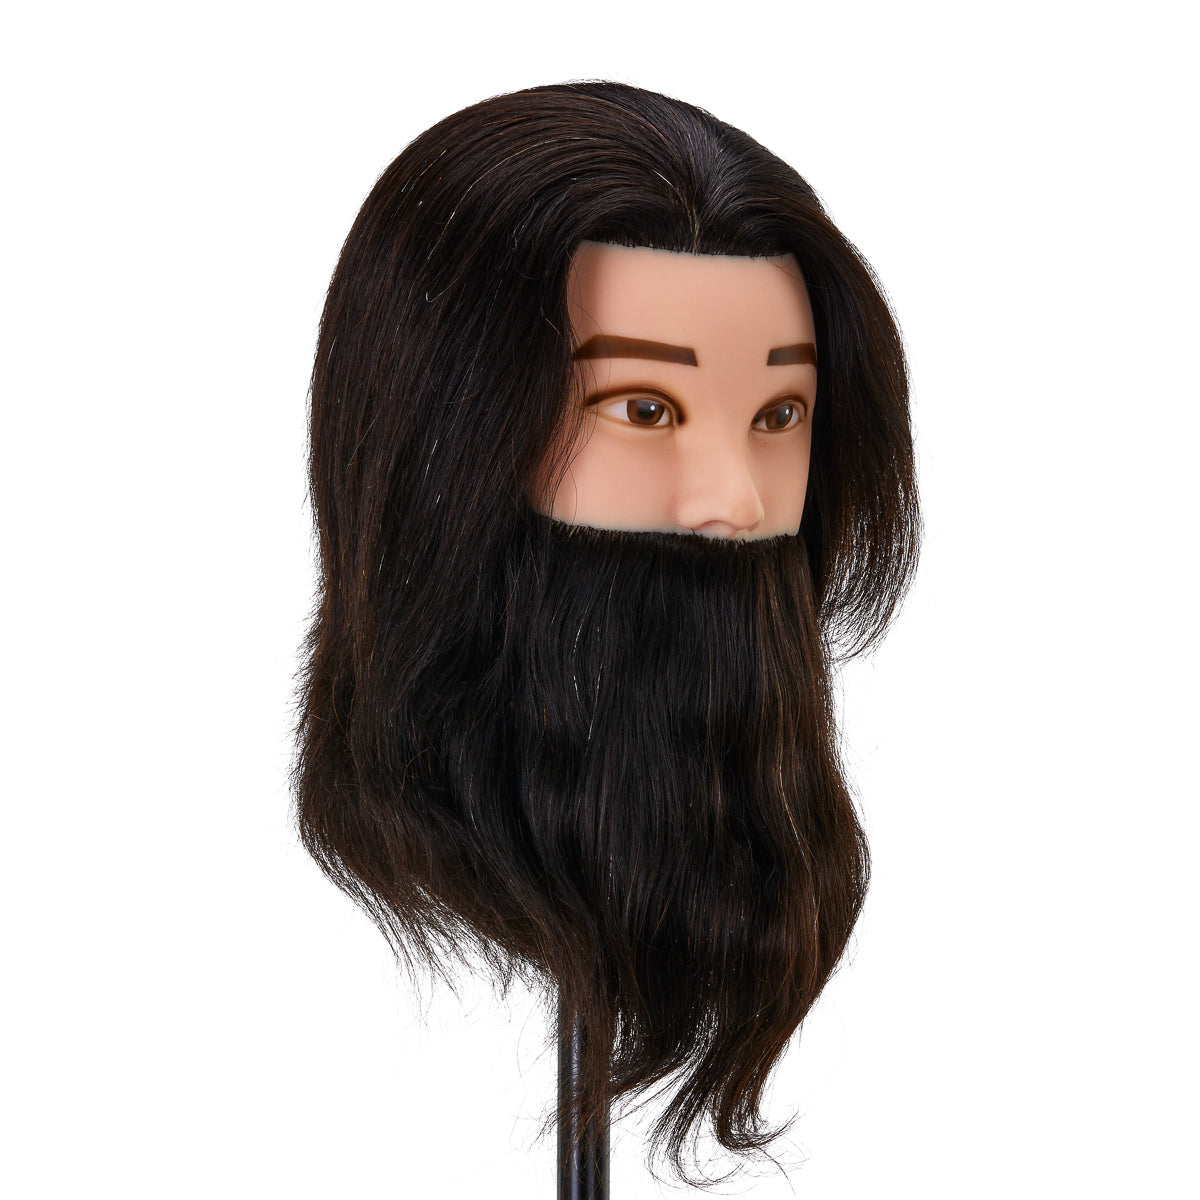 Gabbiano WZ4 Hairdressing Practice and Beard Head with Natural Hair, Color 1#, Length 8"+6" 